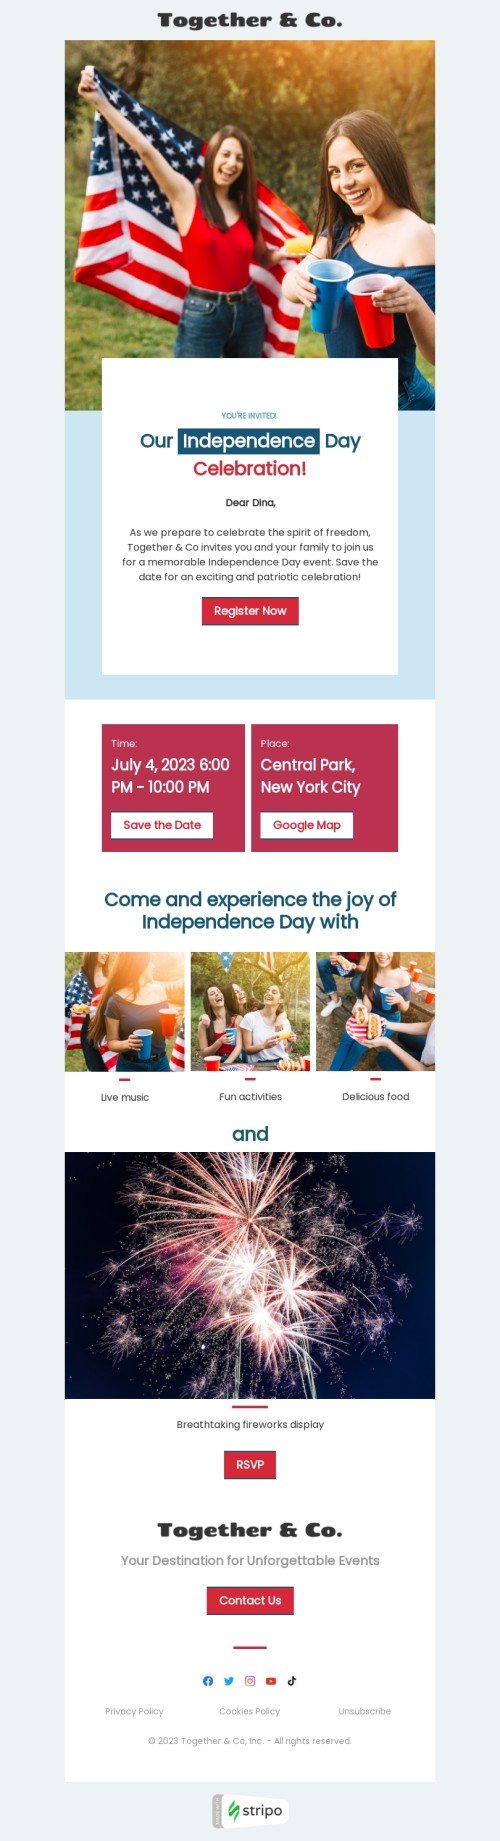 Independence Day email template "Celebrate the spirit of freedom" for hobbies industry mobile view